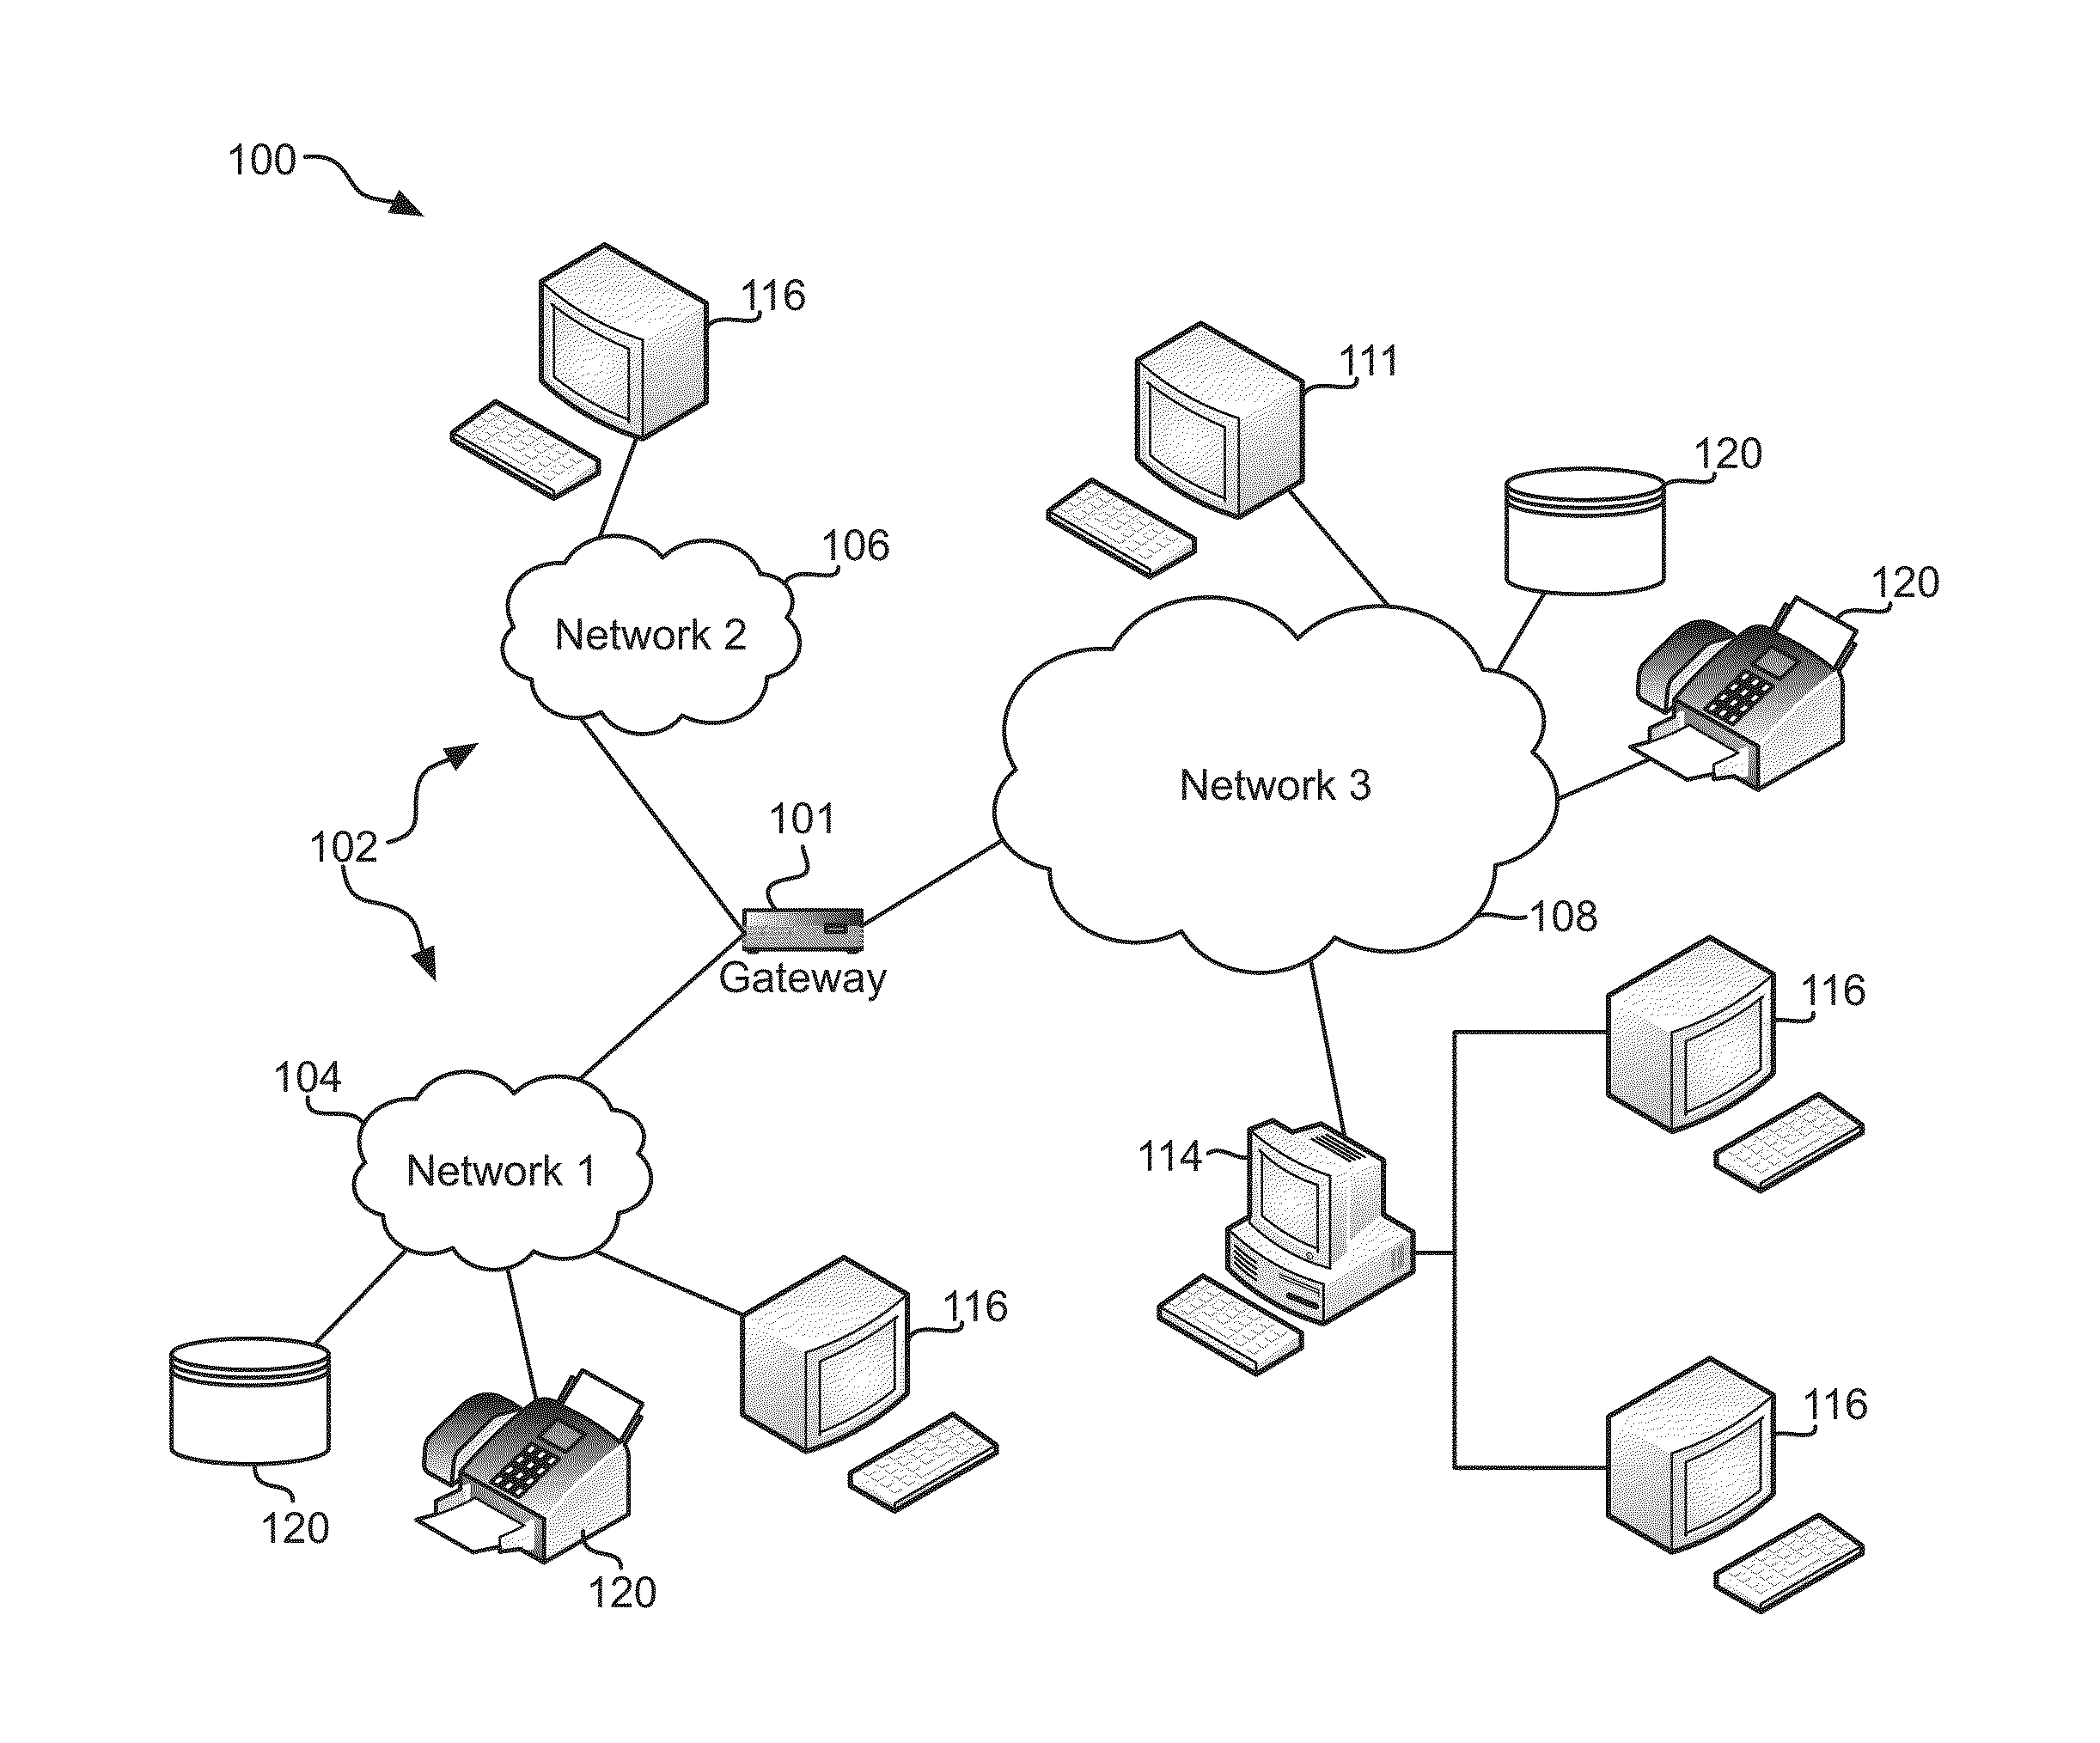 Systems and methods for selectively enabling and disabling hardware features